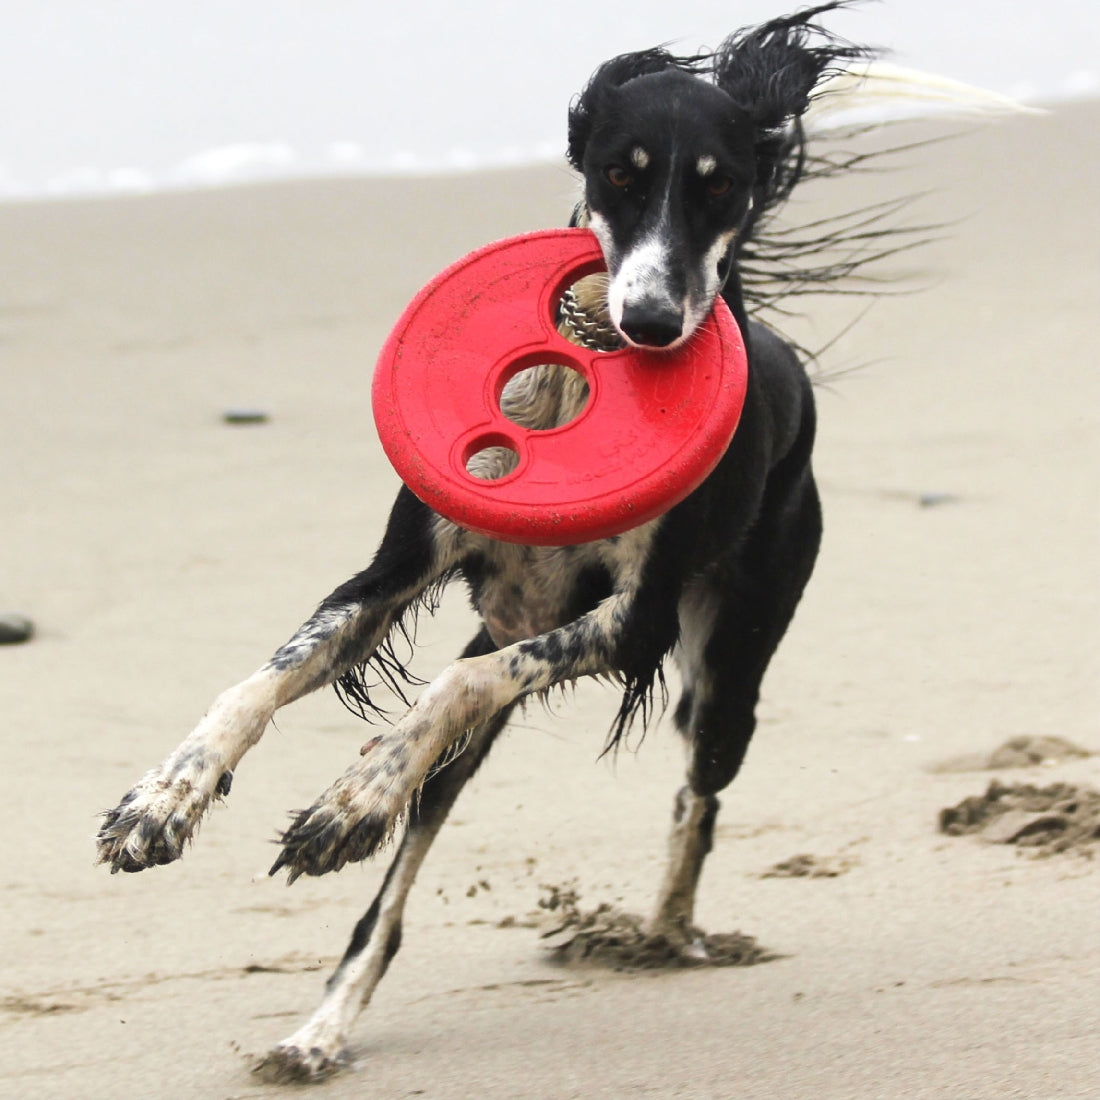 Dog carrying red Rogz frisbee on the beach.